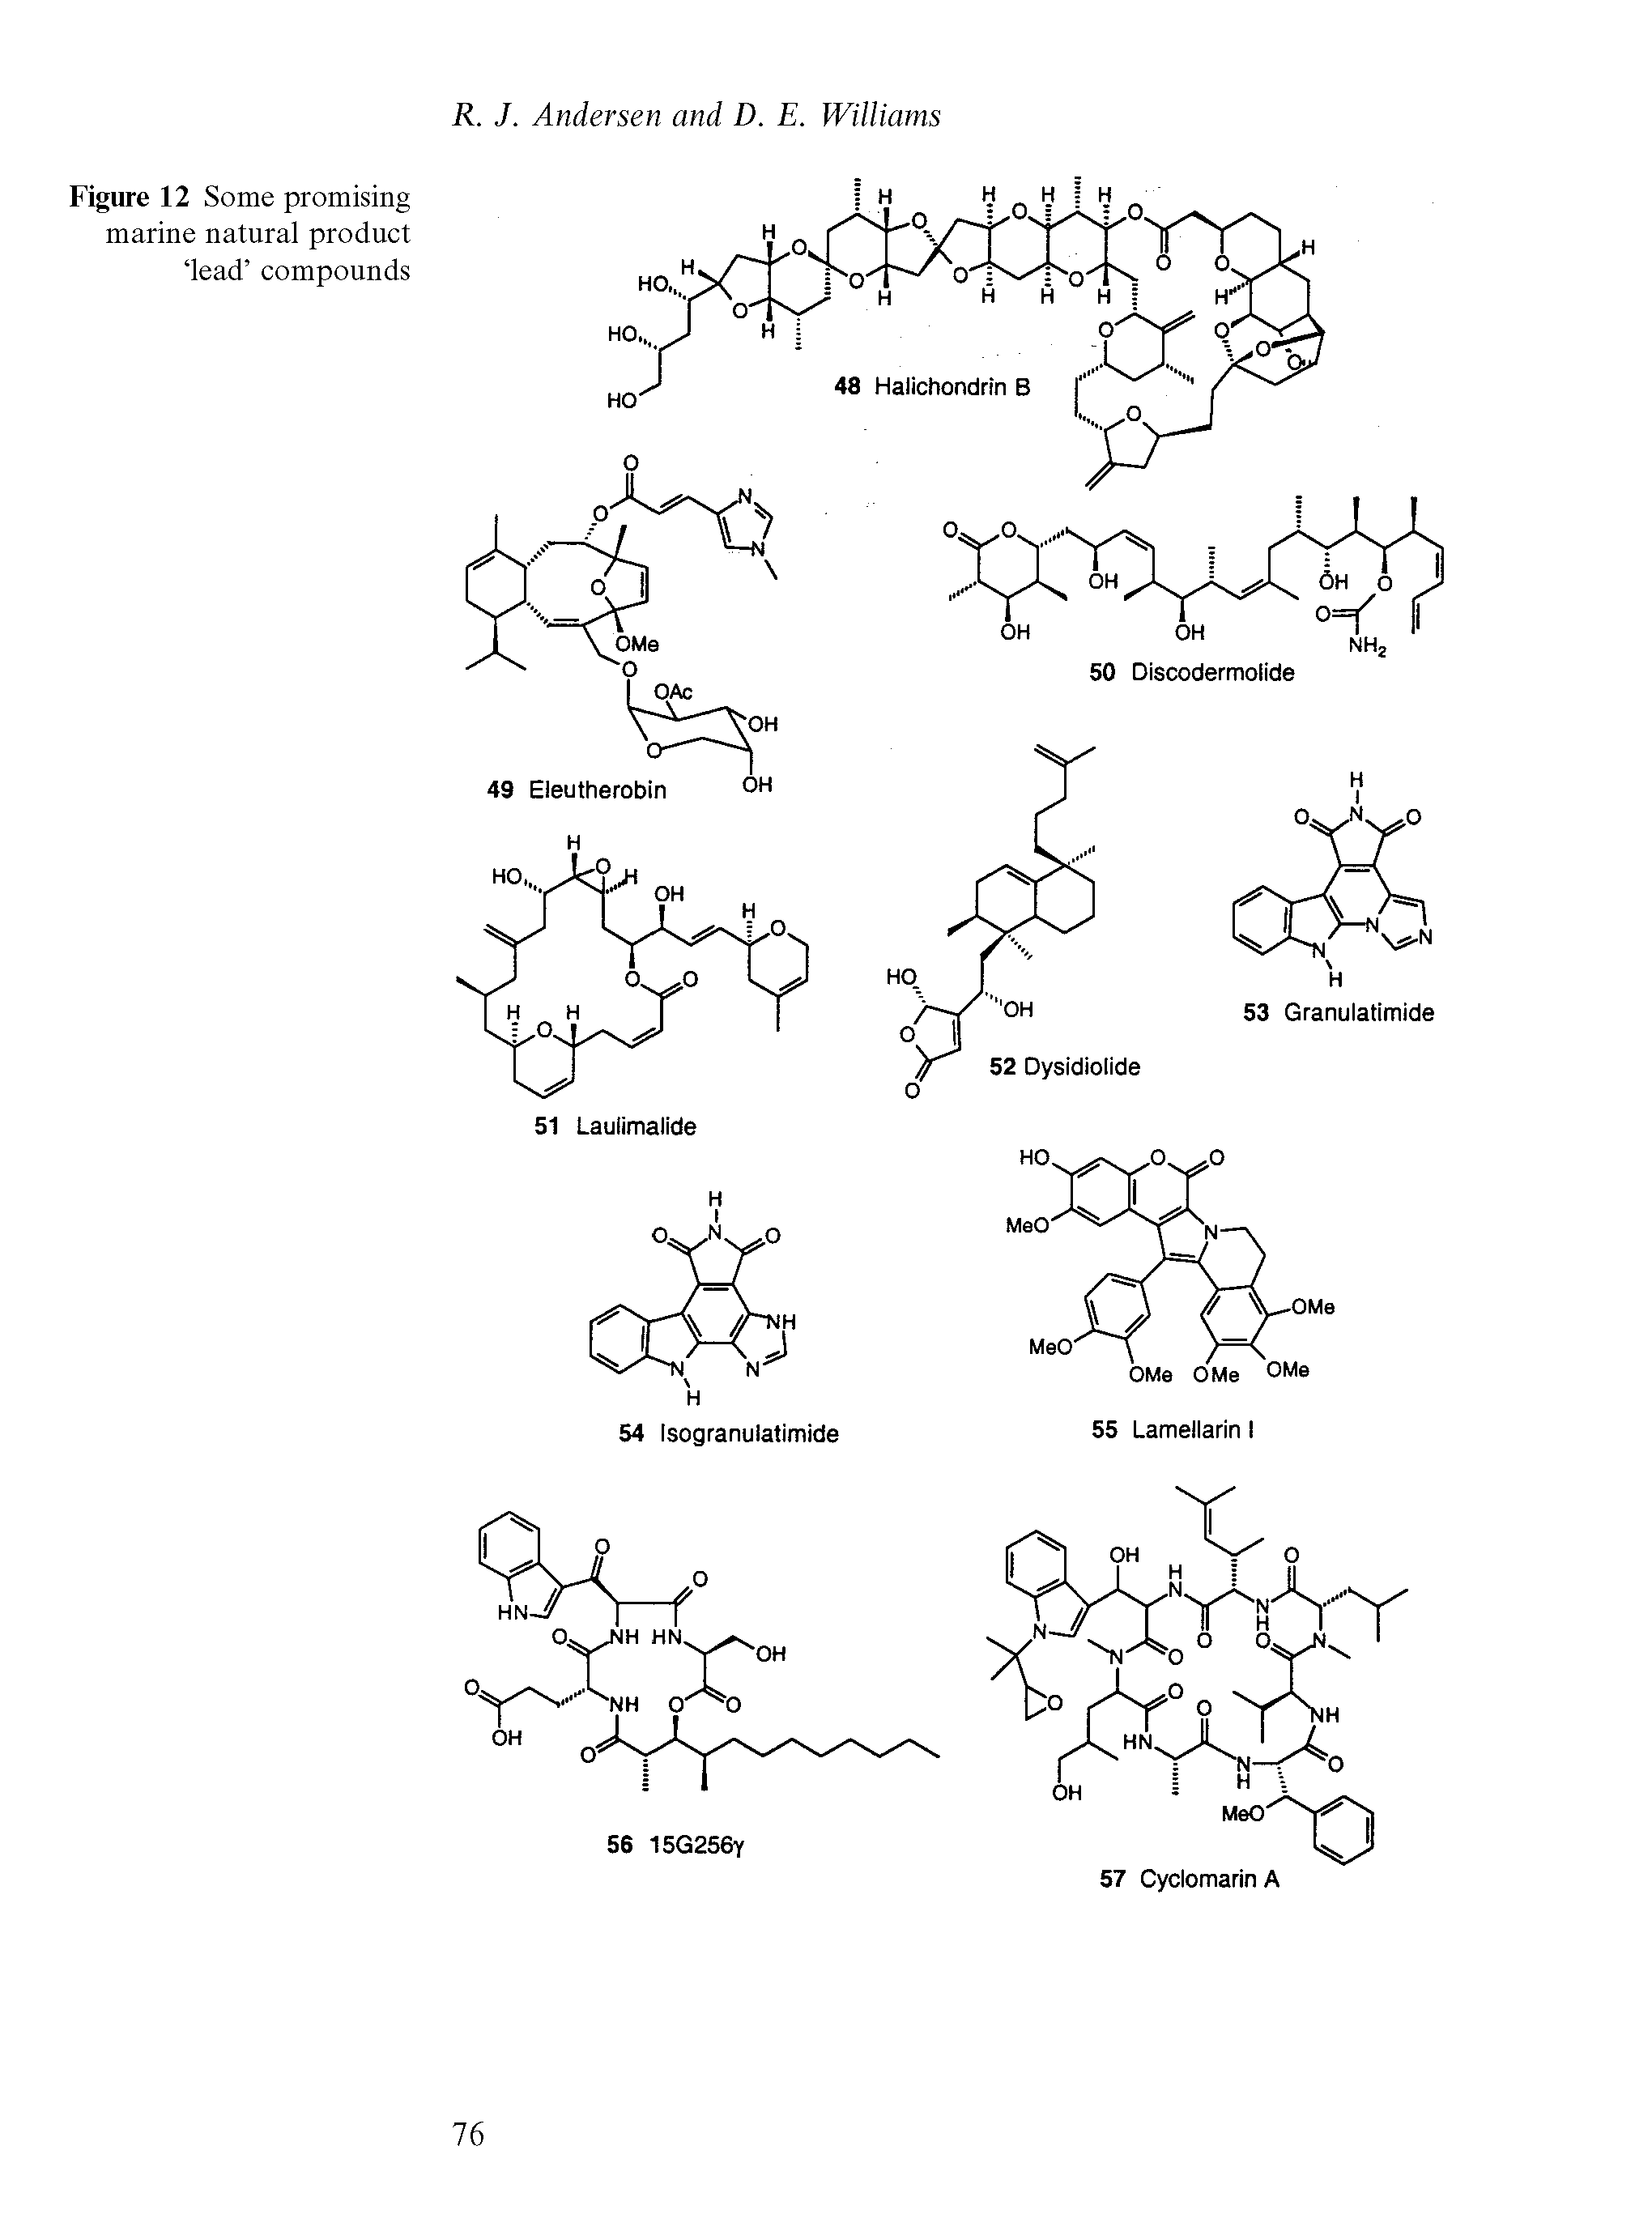 Figure 12 Some promising marine natural product lead compounds...